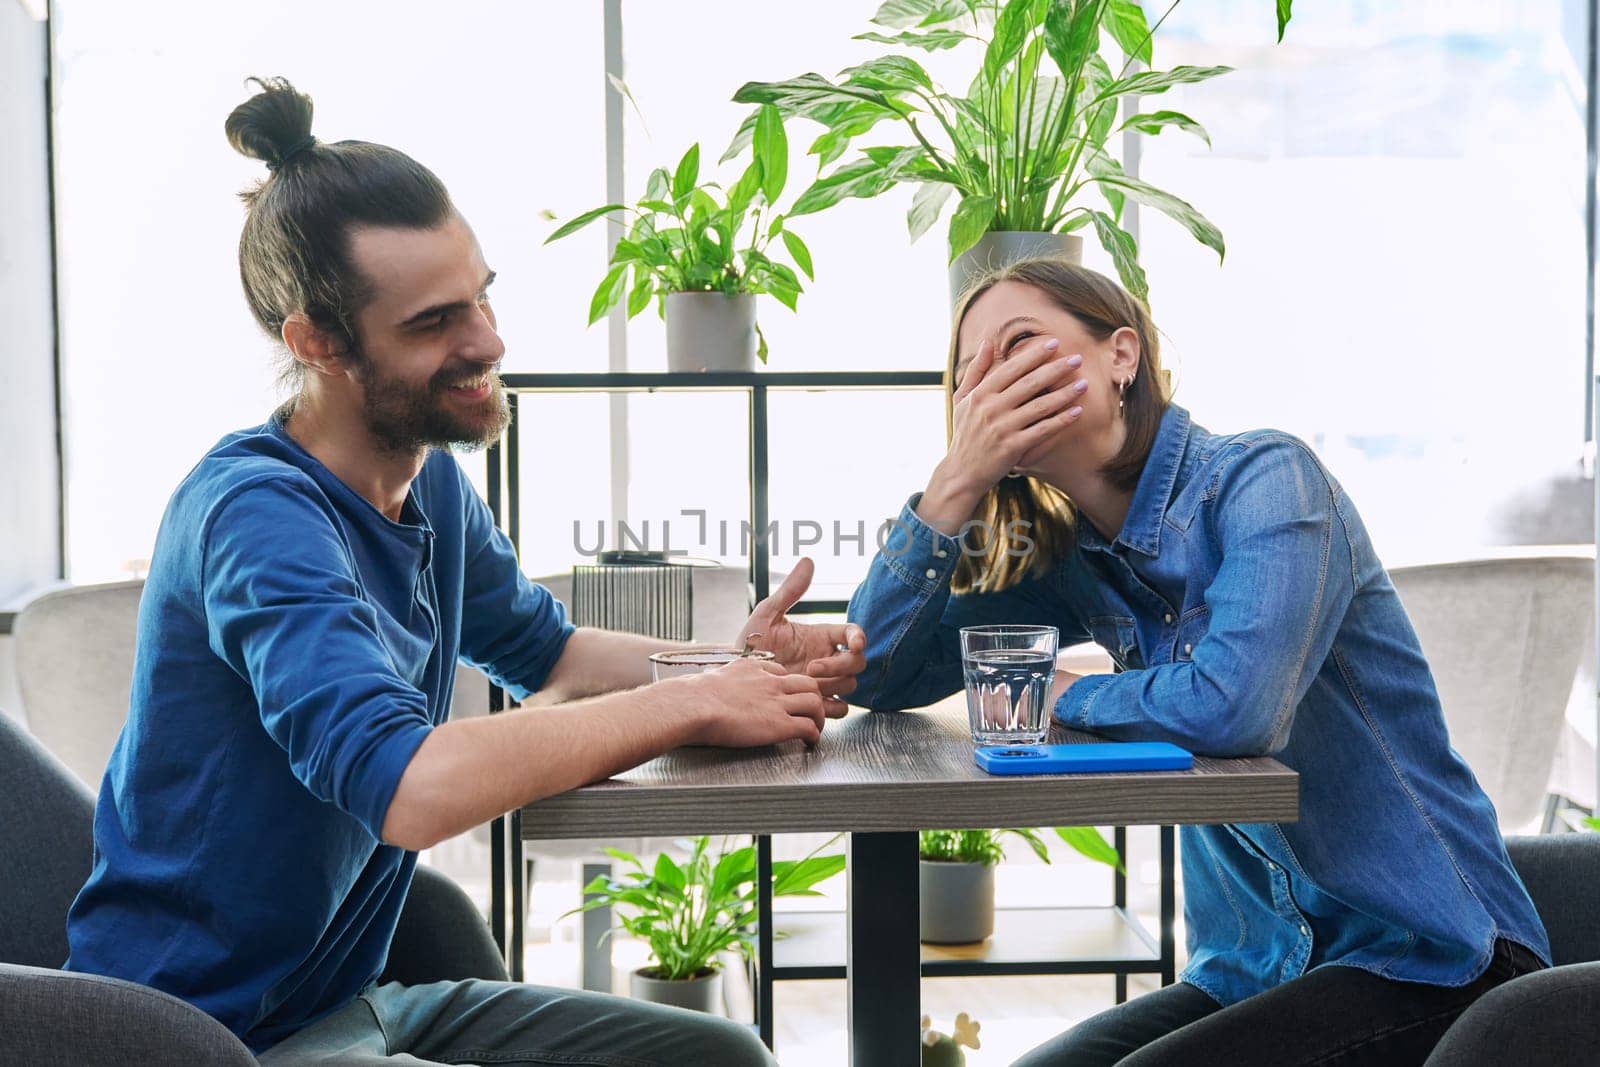 Laughing rejoicing cheerful young couple sitting together at table in cafe. Joyful emotions, enjoyment, friendship, happiness, love, togetherness, lifestyle relationships communication youth concept